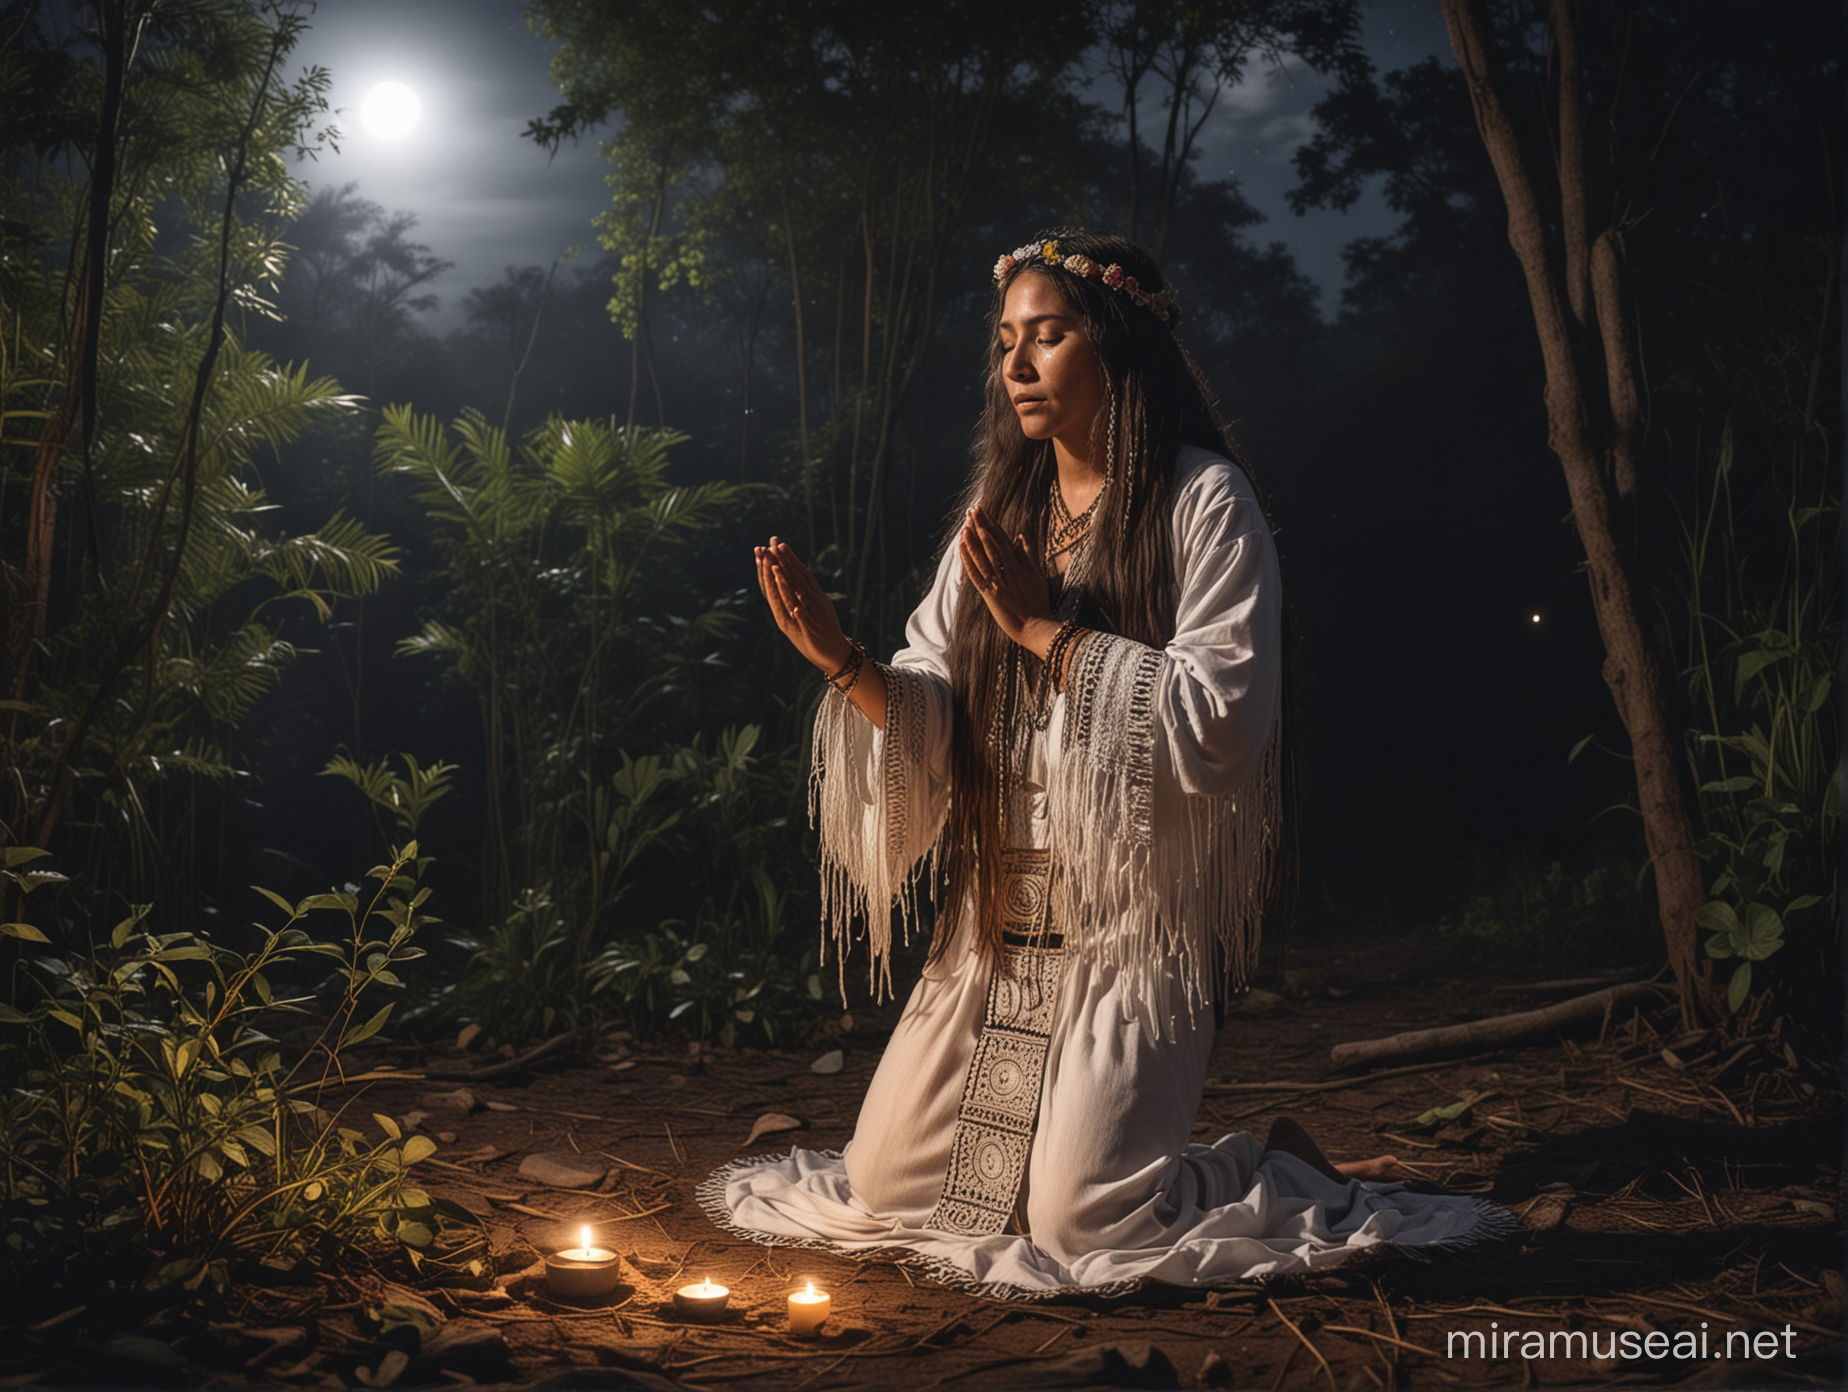 Mexican shaman woman praying in the jungle at night with moon making magic ceremony dressed in plain woven clothing with long flowing hair 